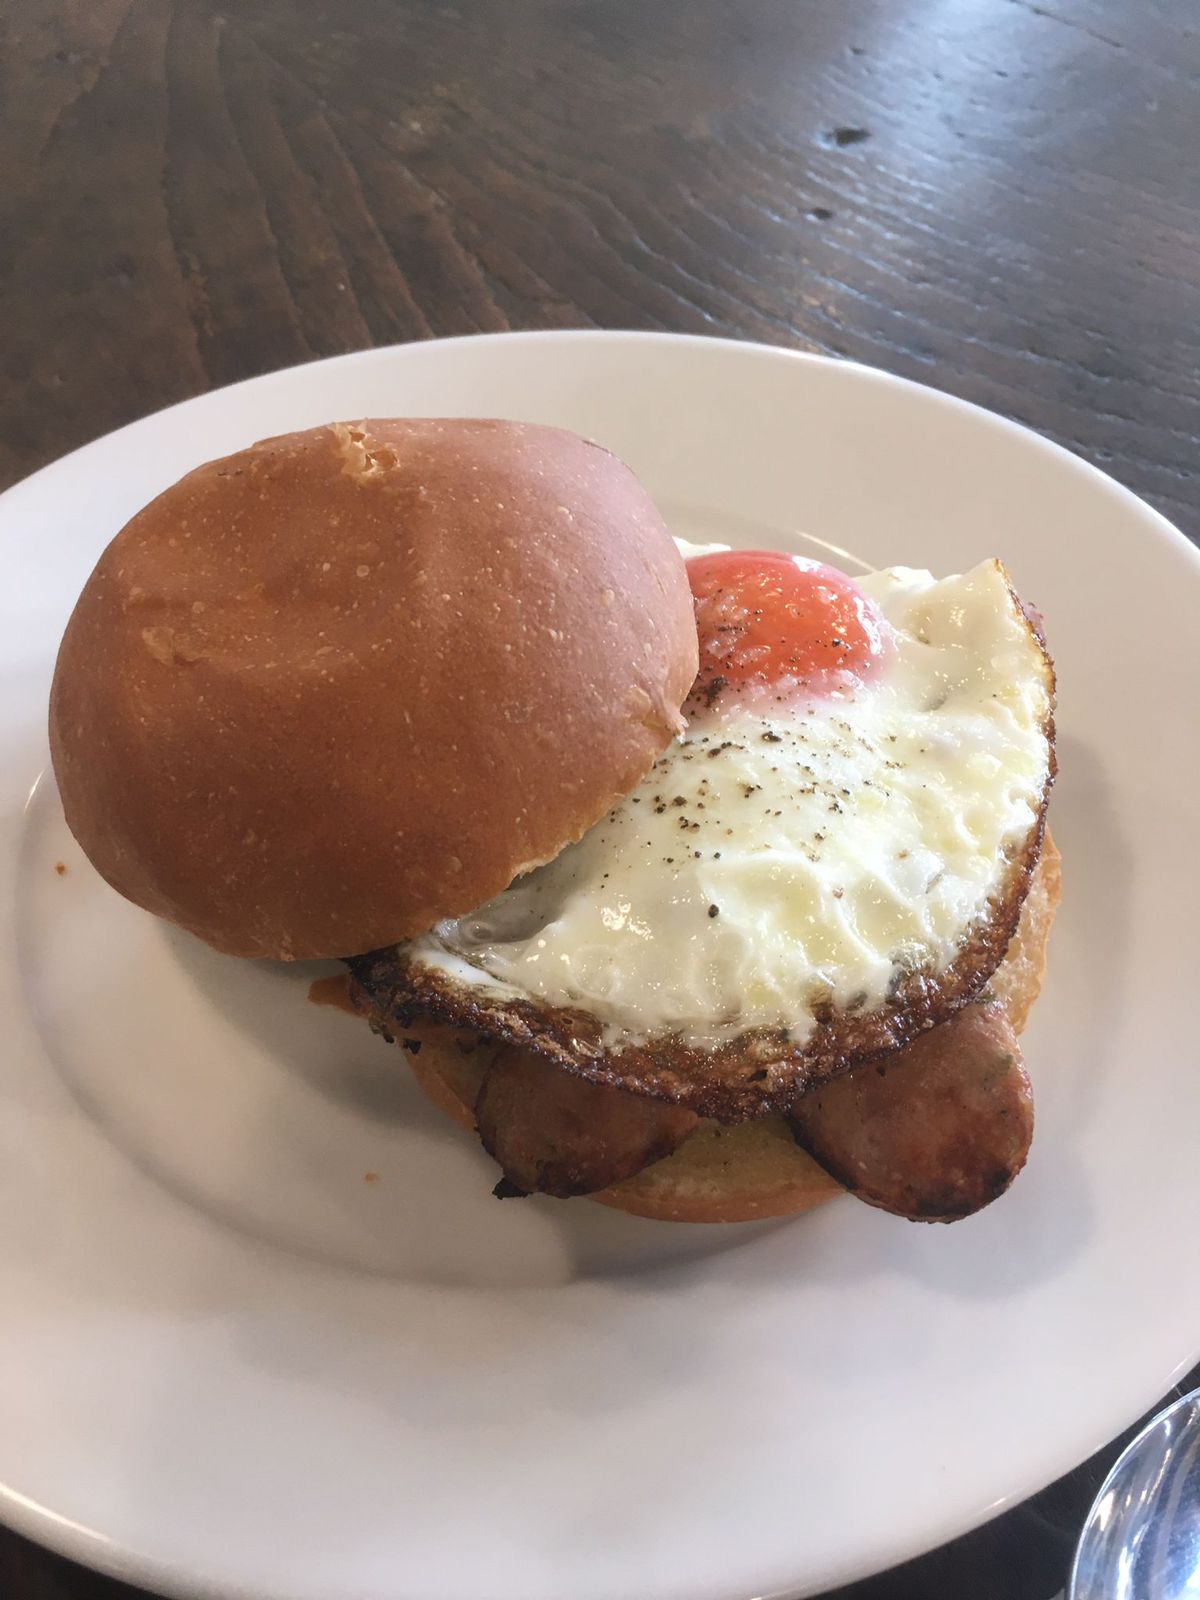 A bread roll filled with fried egg and sausages on a white plate, on a wooden table.